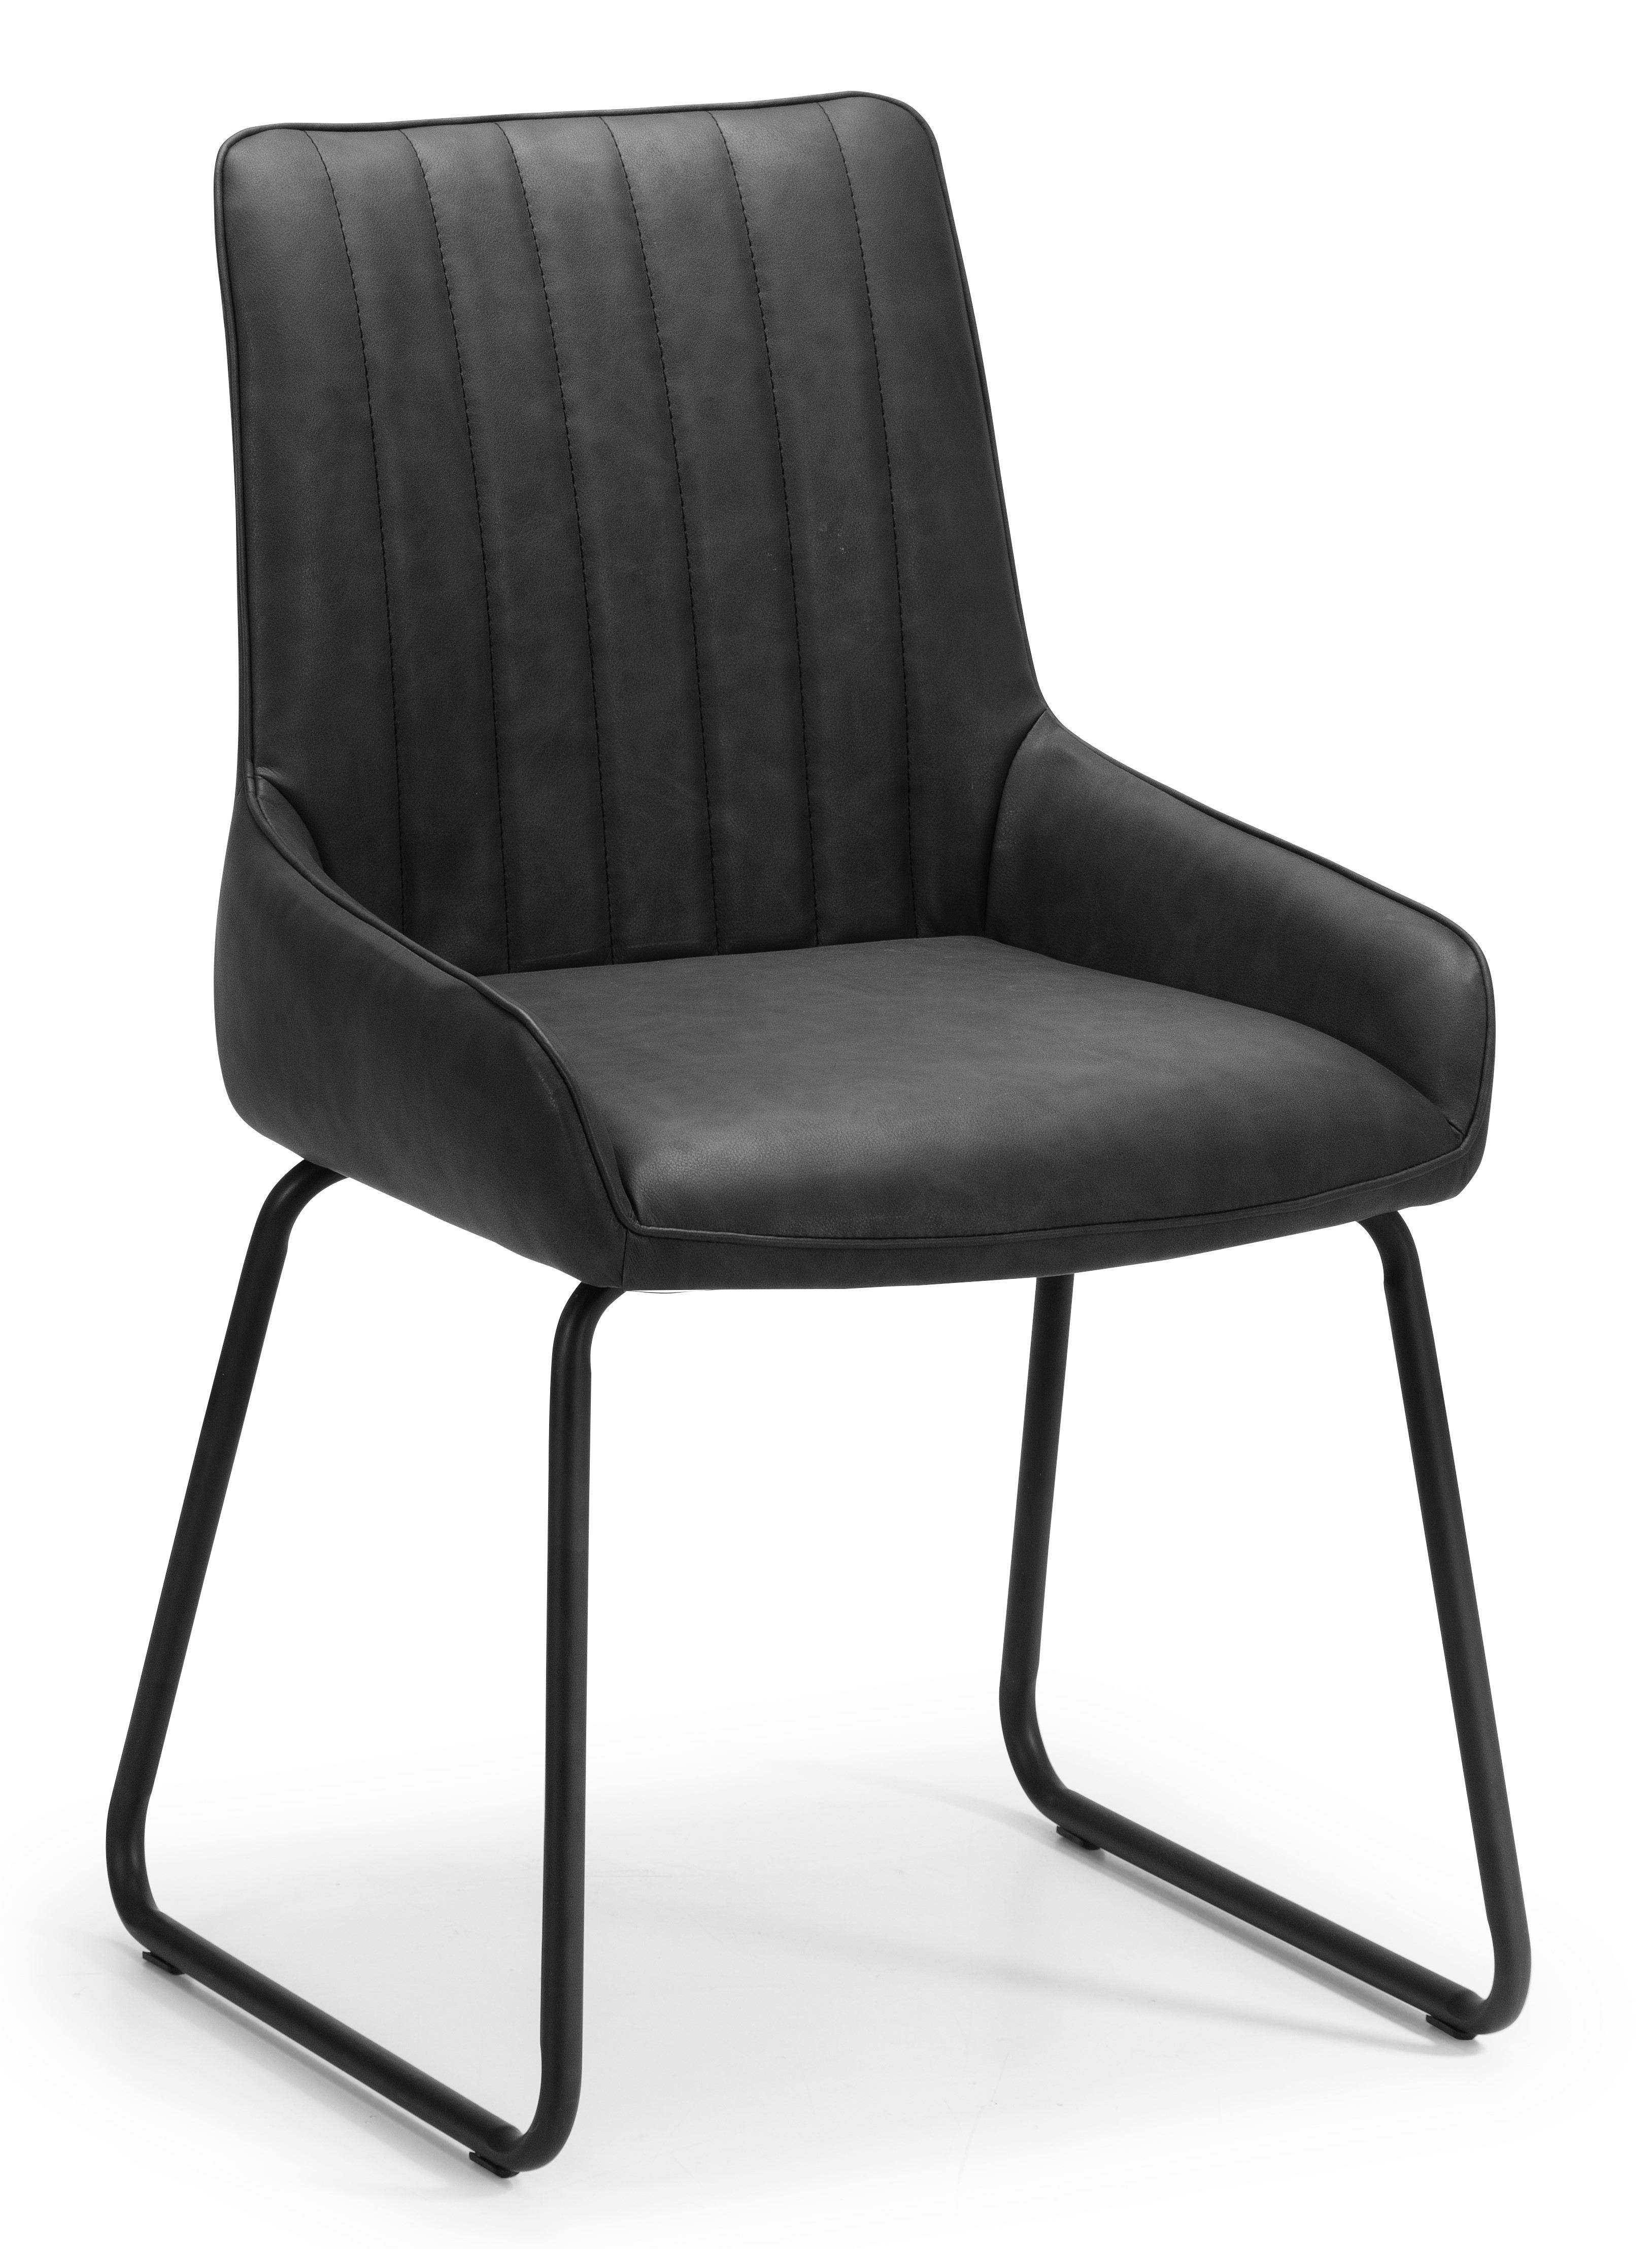 Bexley Dining Chair